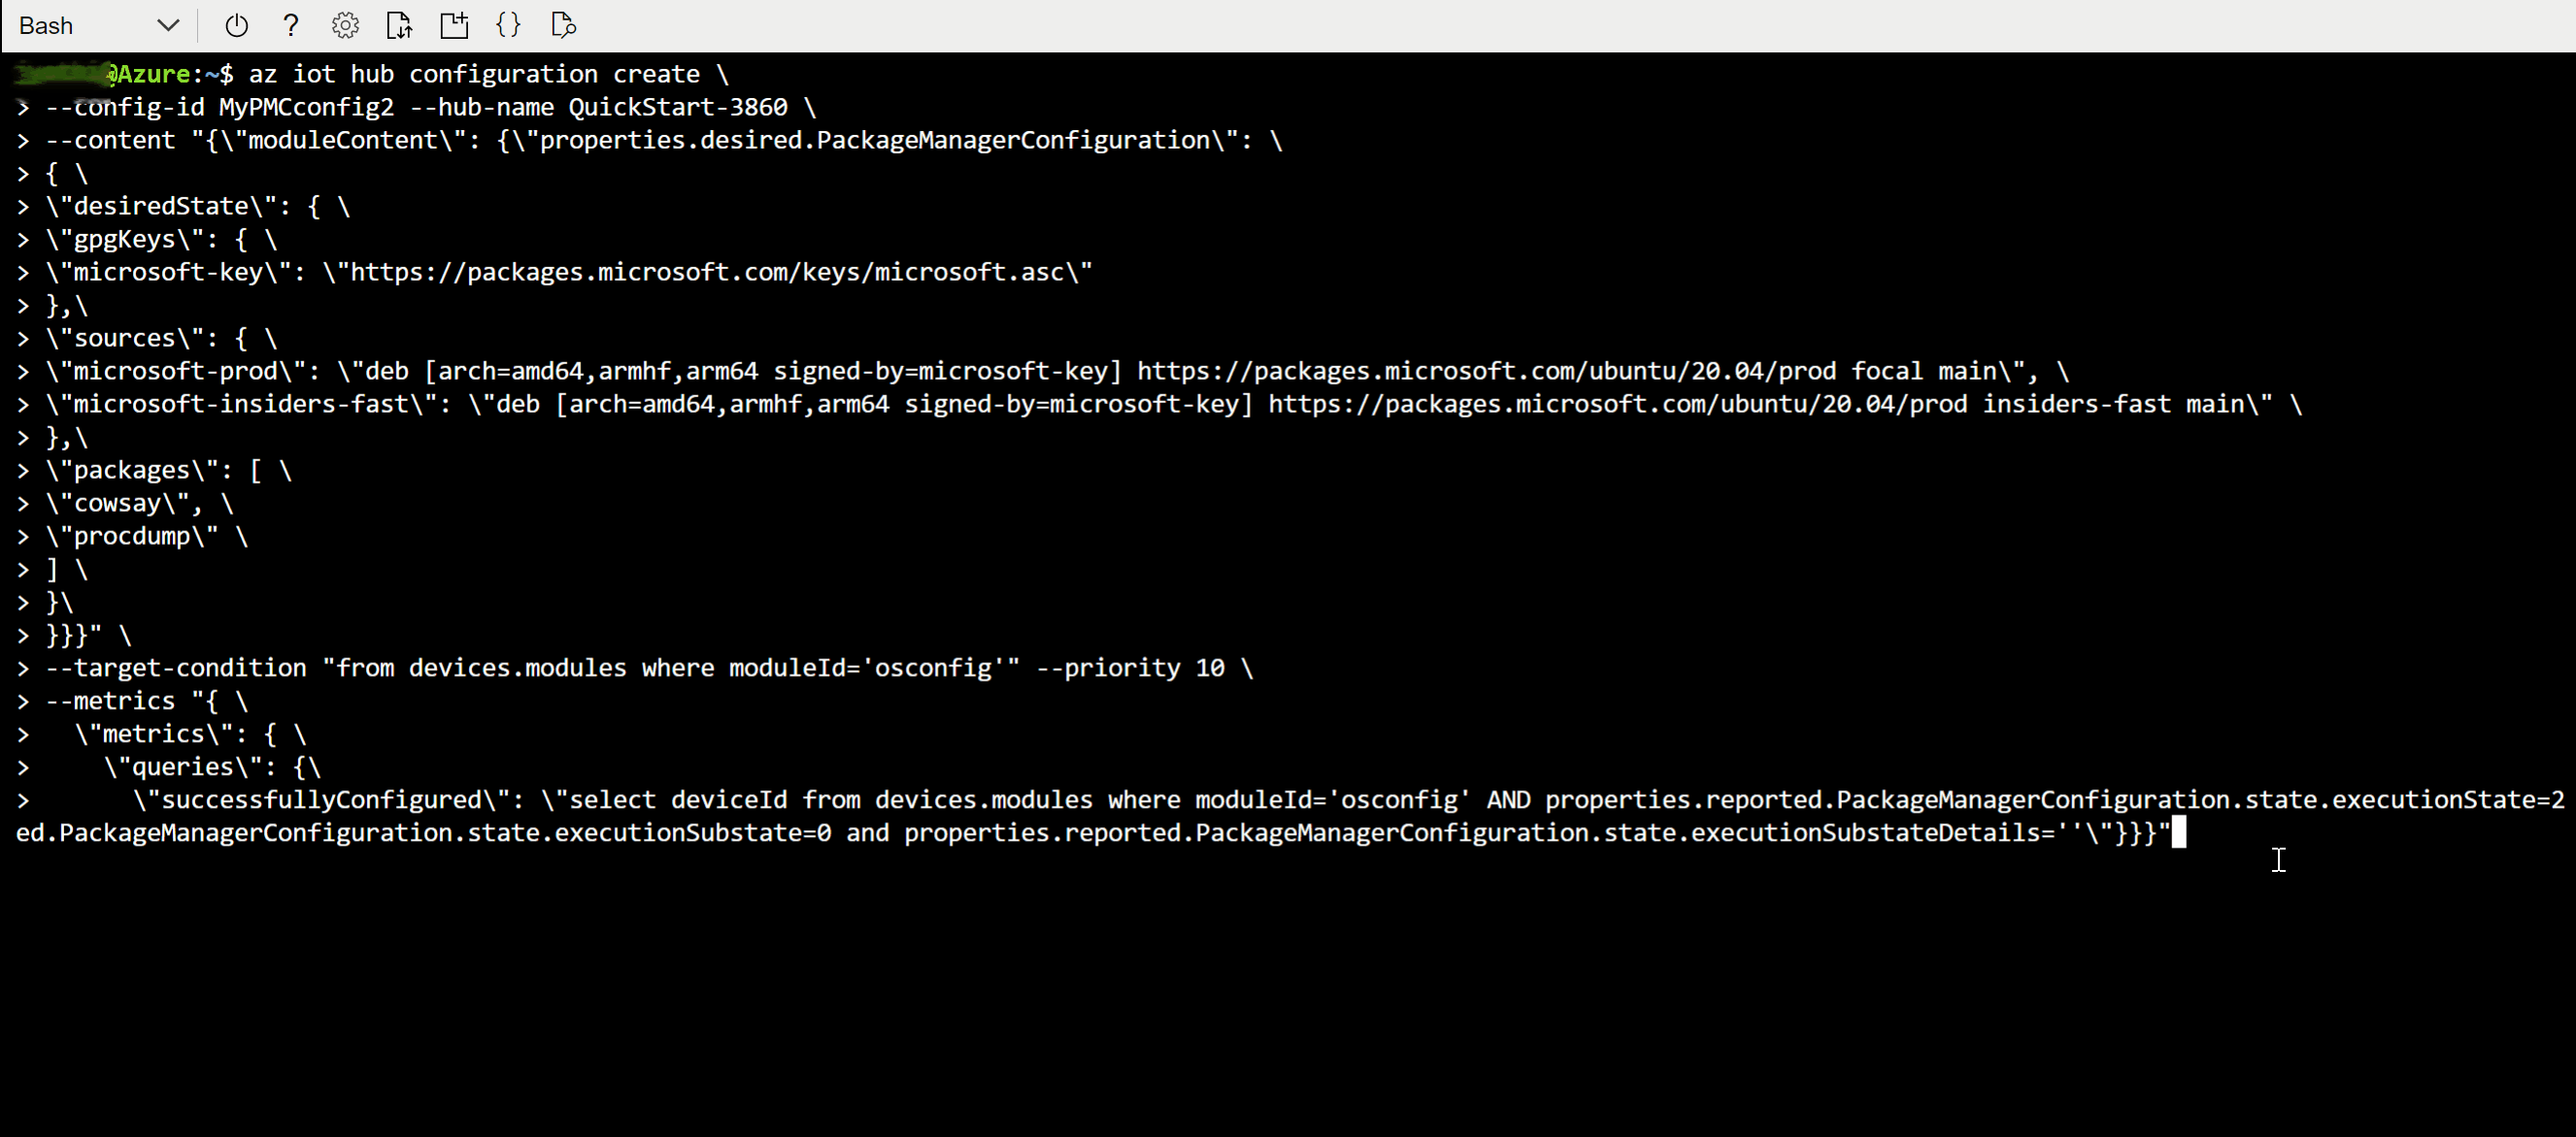 Screen capture showing how to create a package manager configuration for a fleet of devices from bash